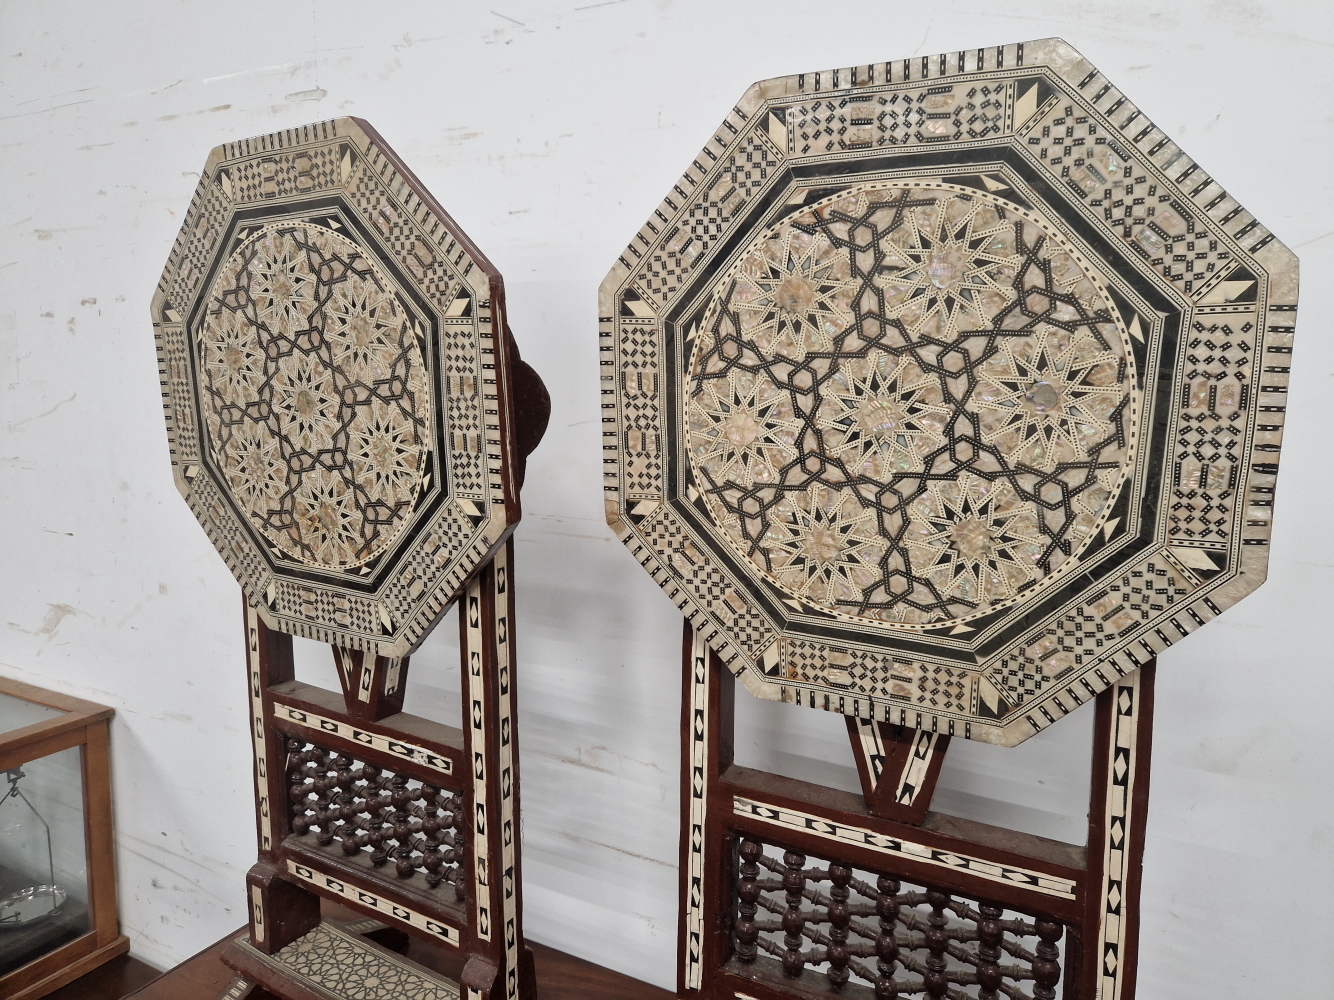 A PAIR OF ISLAMIC FOLDING OCTAGONAL TABLES GEOMETRICALLY INLAID IN MOTHER OF PEARL AND EBONY - Image 4 of 13